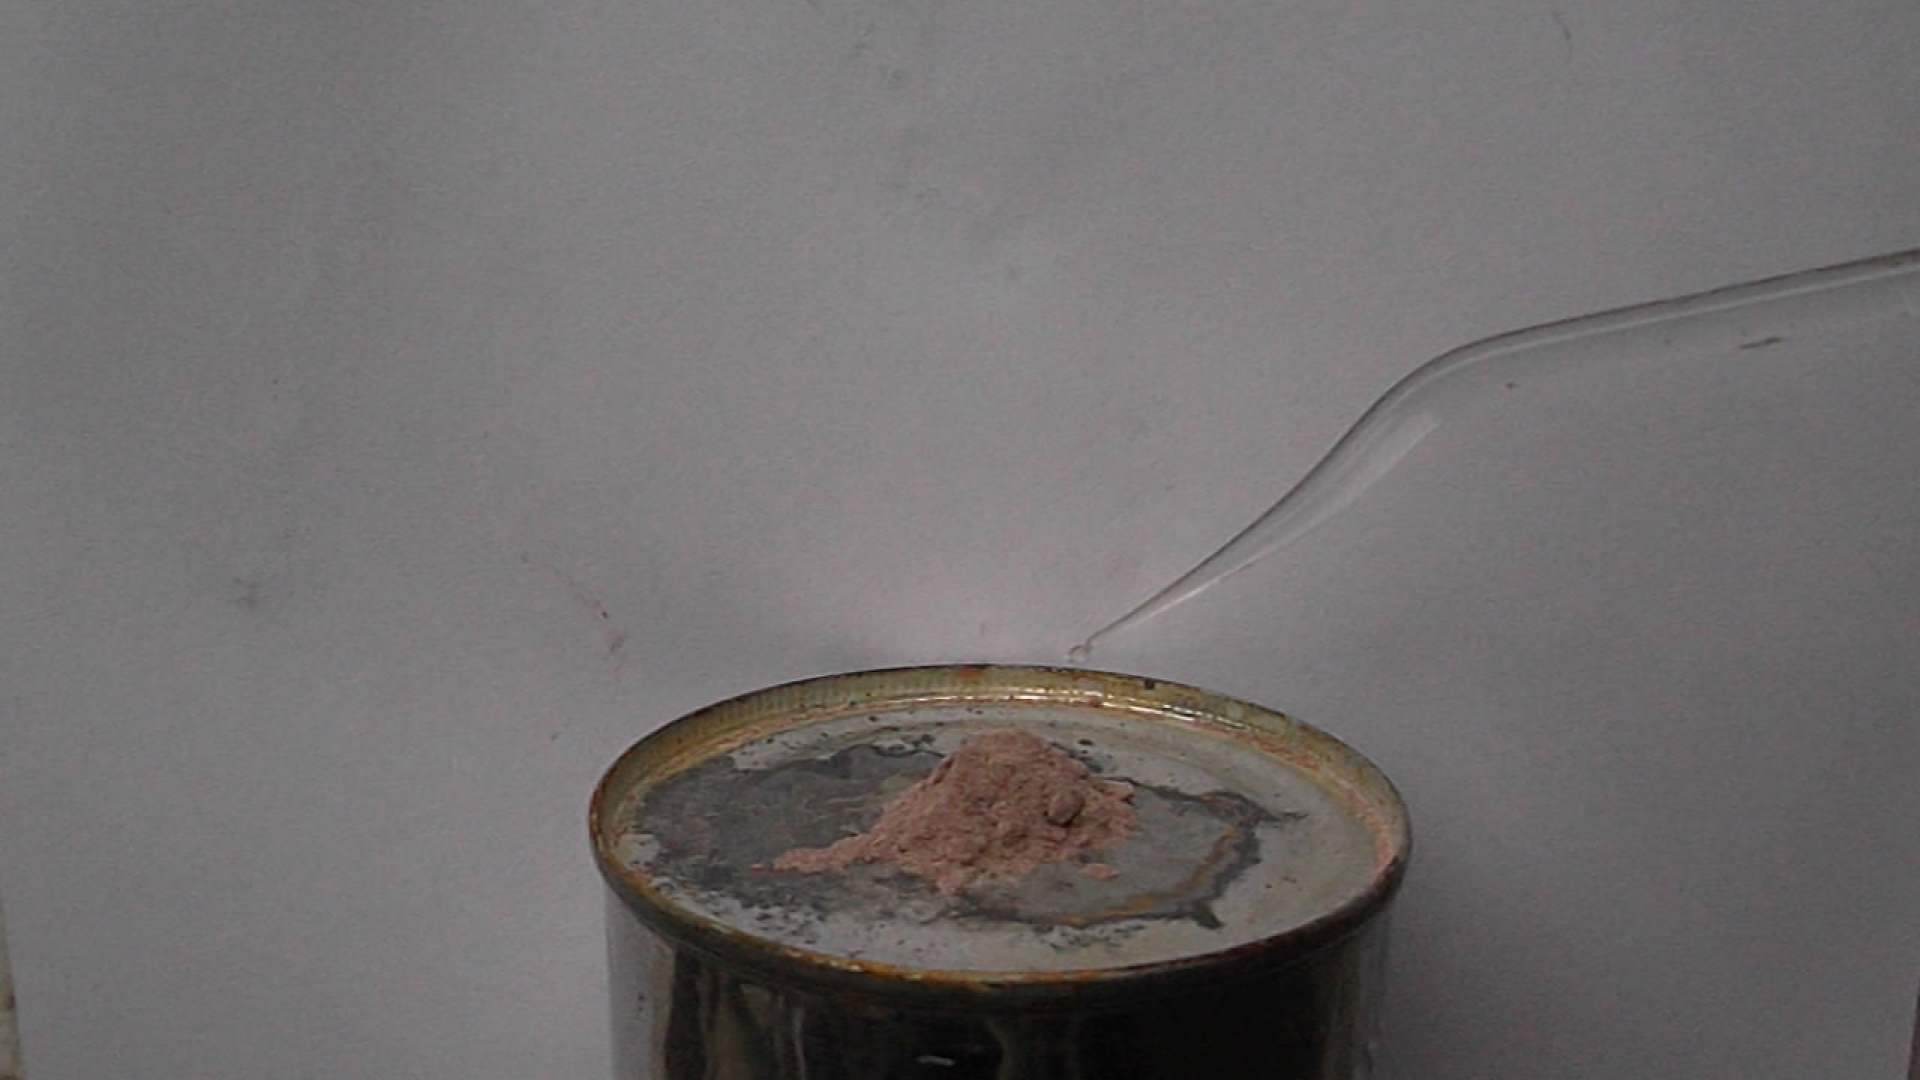      (         ). Ignition of a Mixture of Match ''Heads'' and Sugar after adding of Sulfuric Acid